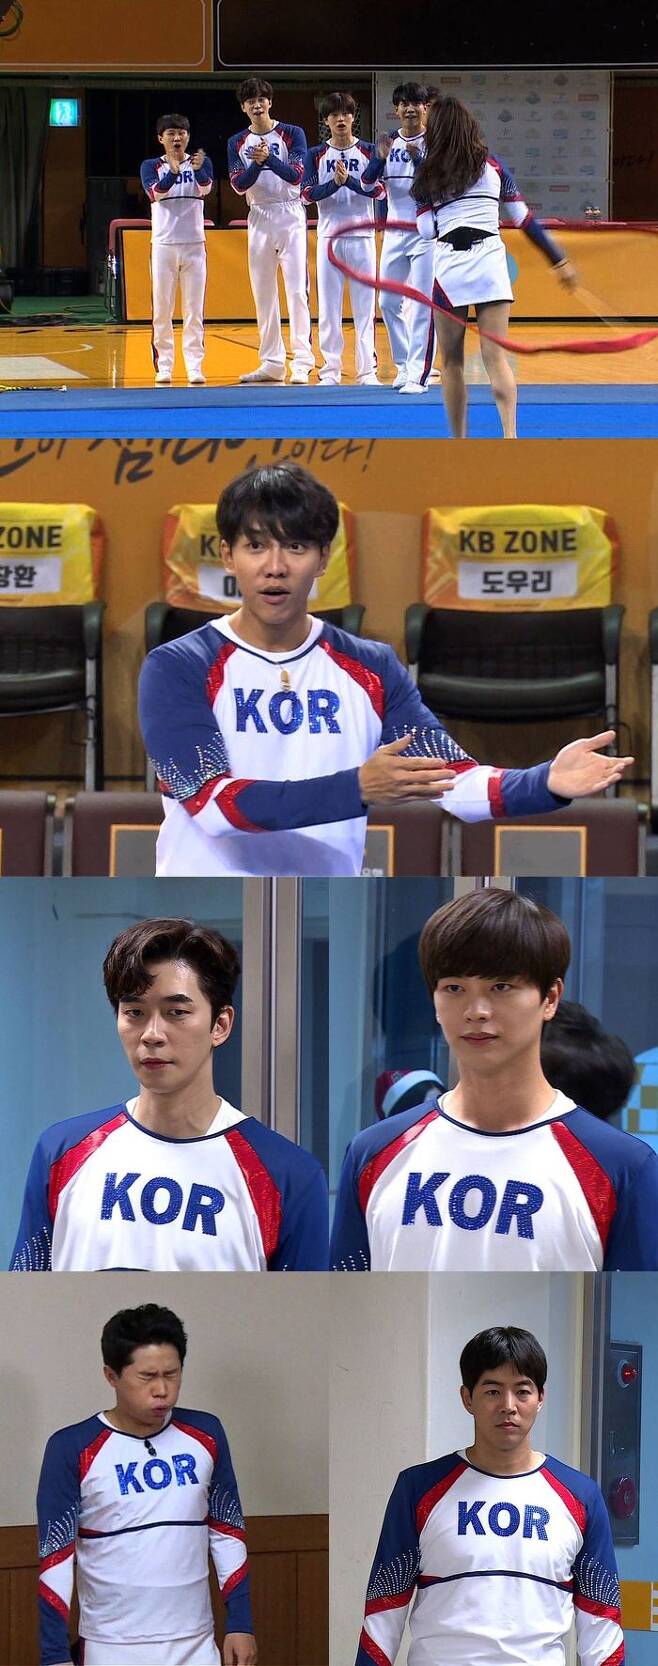 Gymnastics Fairy appears as a surprise support force on All The ButlersSBS All The Butlers to be broadcasted on the 19th will feature a huge support group that will further upgrade the Shin Sang Sang Hyungjae Shin Sung Rok, Lee Seung-gi, Yang Se-hyeong and Cheerleading of the upbringing.On this day, the Cheerleading challenge of Shin Sang-hyung will be released following the last broadcast.On the day of the Cheerleading performance, the members headed to the Cheongju Indoor Gymnasium where the actual performance would be held for the last practice, when a limited express support group appeared before the members without notice.The members of the support group, called Gymnastics Fairy, cheered and reacted explosively, and his presence upgraded the performance as well as the morale of the members.I wonder who the Hidden Card, which has played a role more than 10,000 people to the members, is really.As the performance approached, the members showed a noticeable tension, and even those who watched them sweated in their hands.Not only the members but also the national players were nervous, saying,  (Todays performance) is more trembling than the World tournament.Lee Seung-gi responded, I am more nervous than my debut.The Cheerleading performance scene of Reversal Scale, which was introduced by Shin Sang-hyung, will be unveiled at All The Butlers broadcasted at 6:25 pm on the 19th.